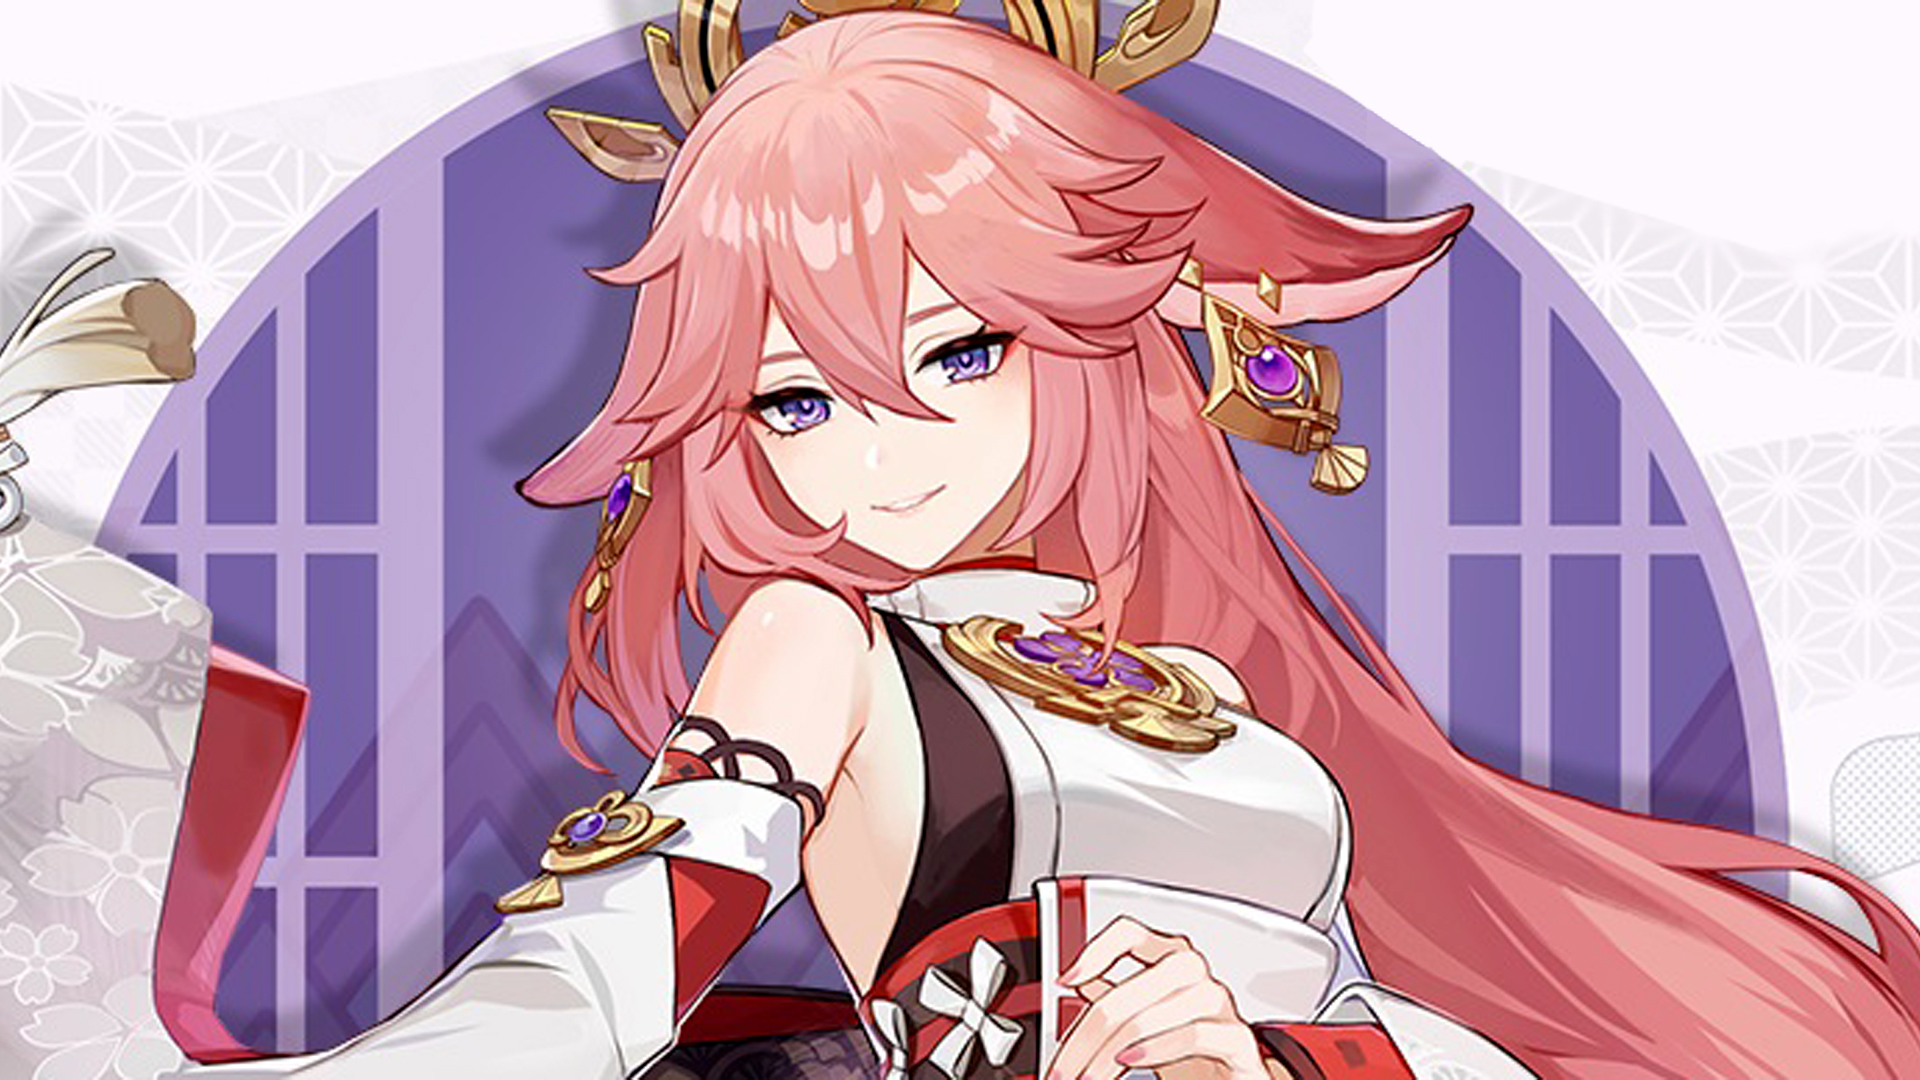 Yae Miko has been confirmed as the next Genshin Impact character